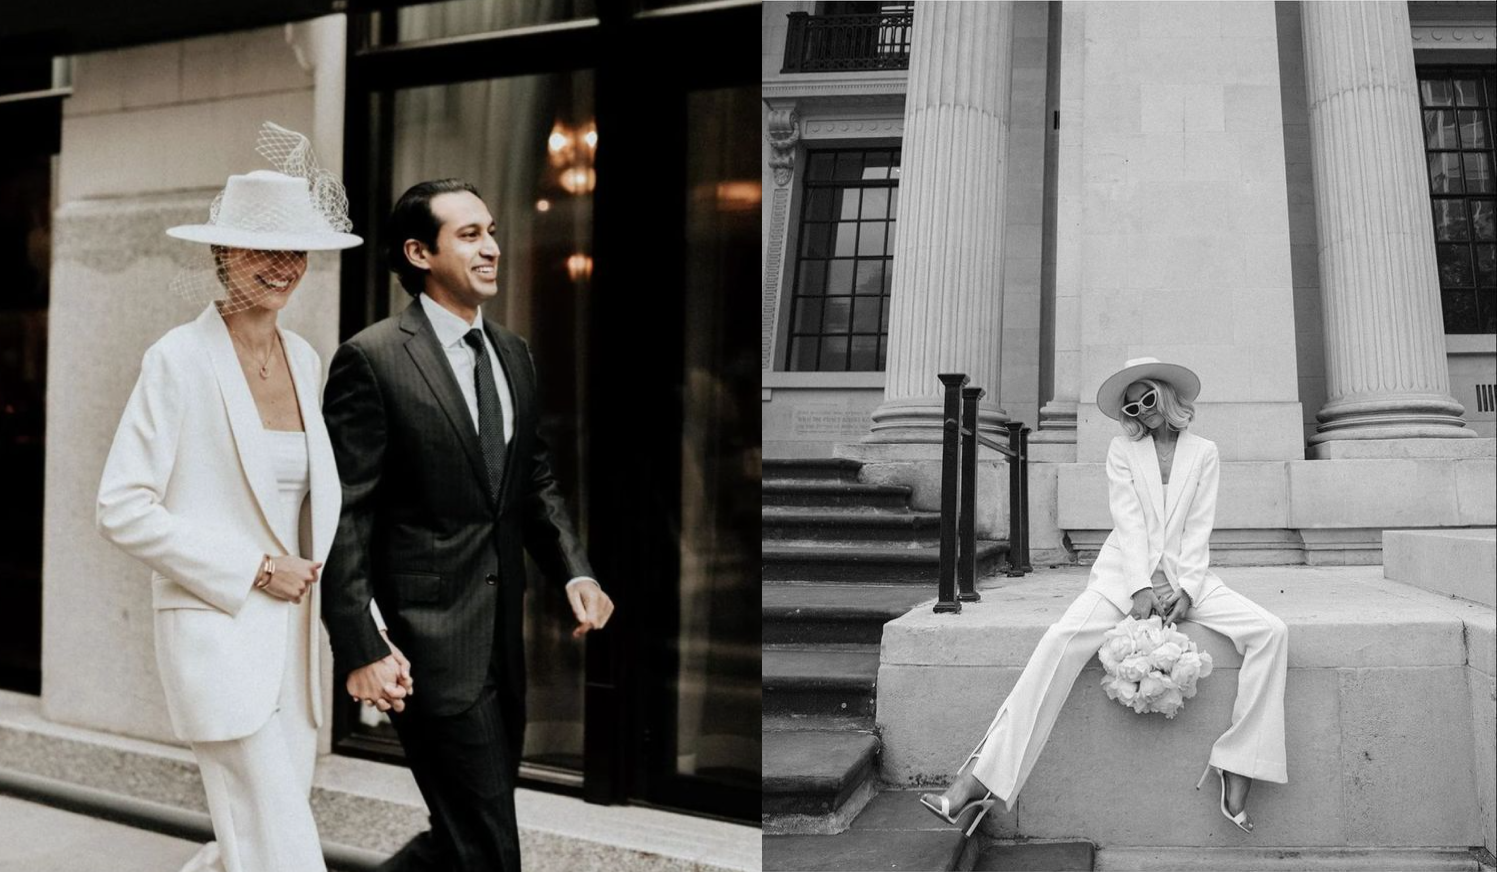 Left; Newly wed couple walking down the street. Bride in white suit with hat and lace veil. Right; Woman sits in white suit, holding a bouquet of white flowers. 